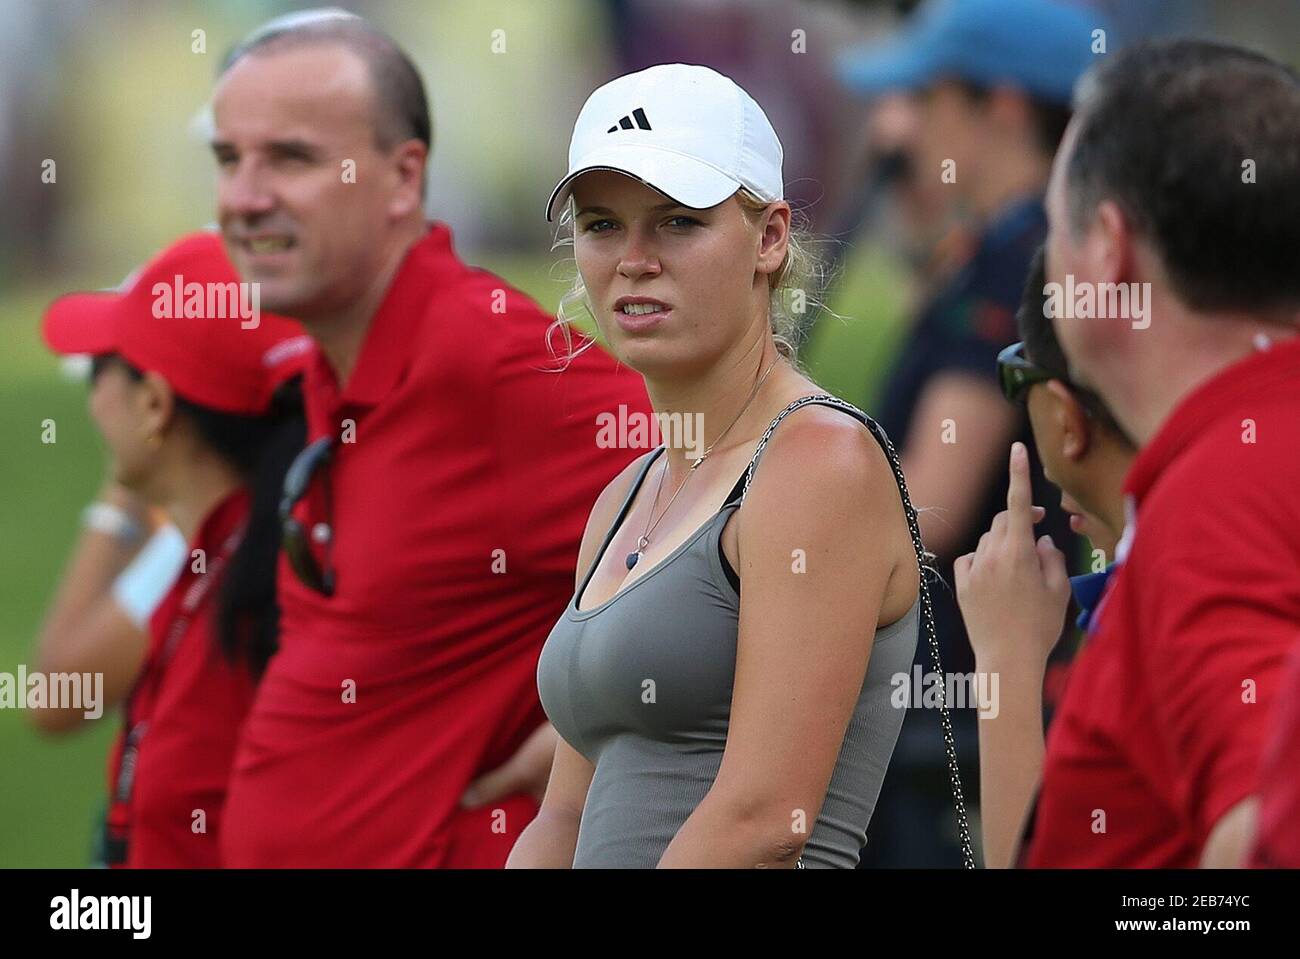 Golf - Barclays Singapore Open - Sentosa Golf Club, Singapore - 10/11/12  Denmark's Caroline Wozniacki, girlfriend of Northern Ireland's Rory McIlroy  (not pictured), looks on as play resumes for the second round